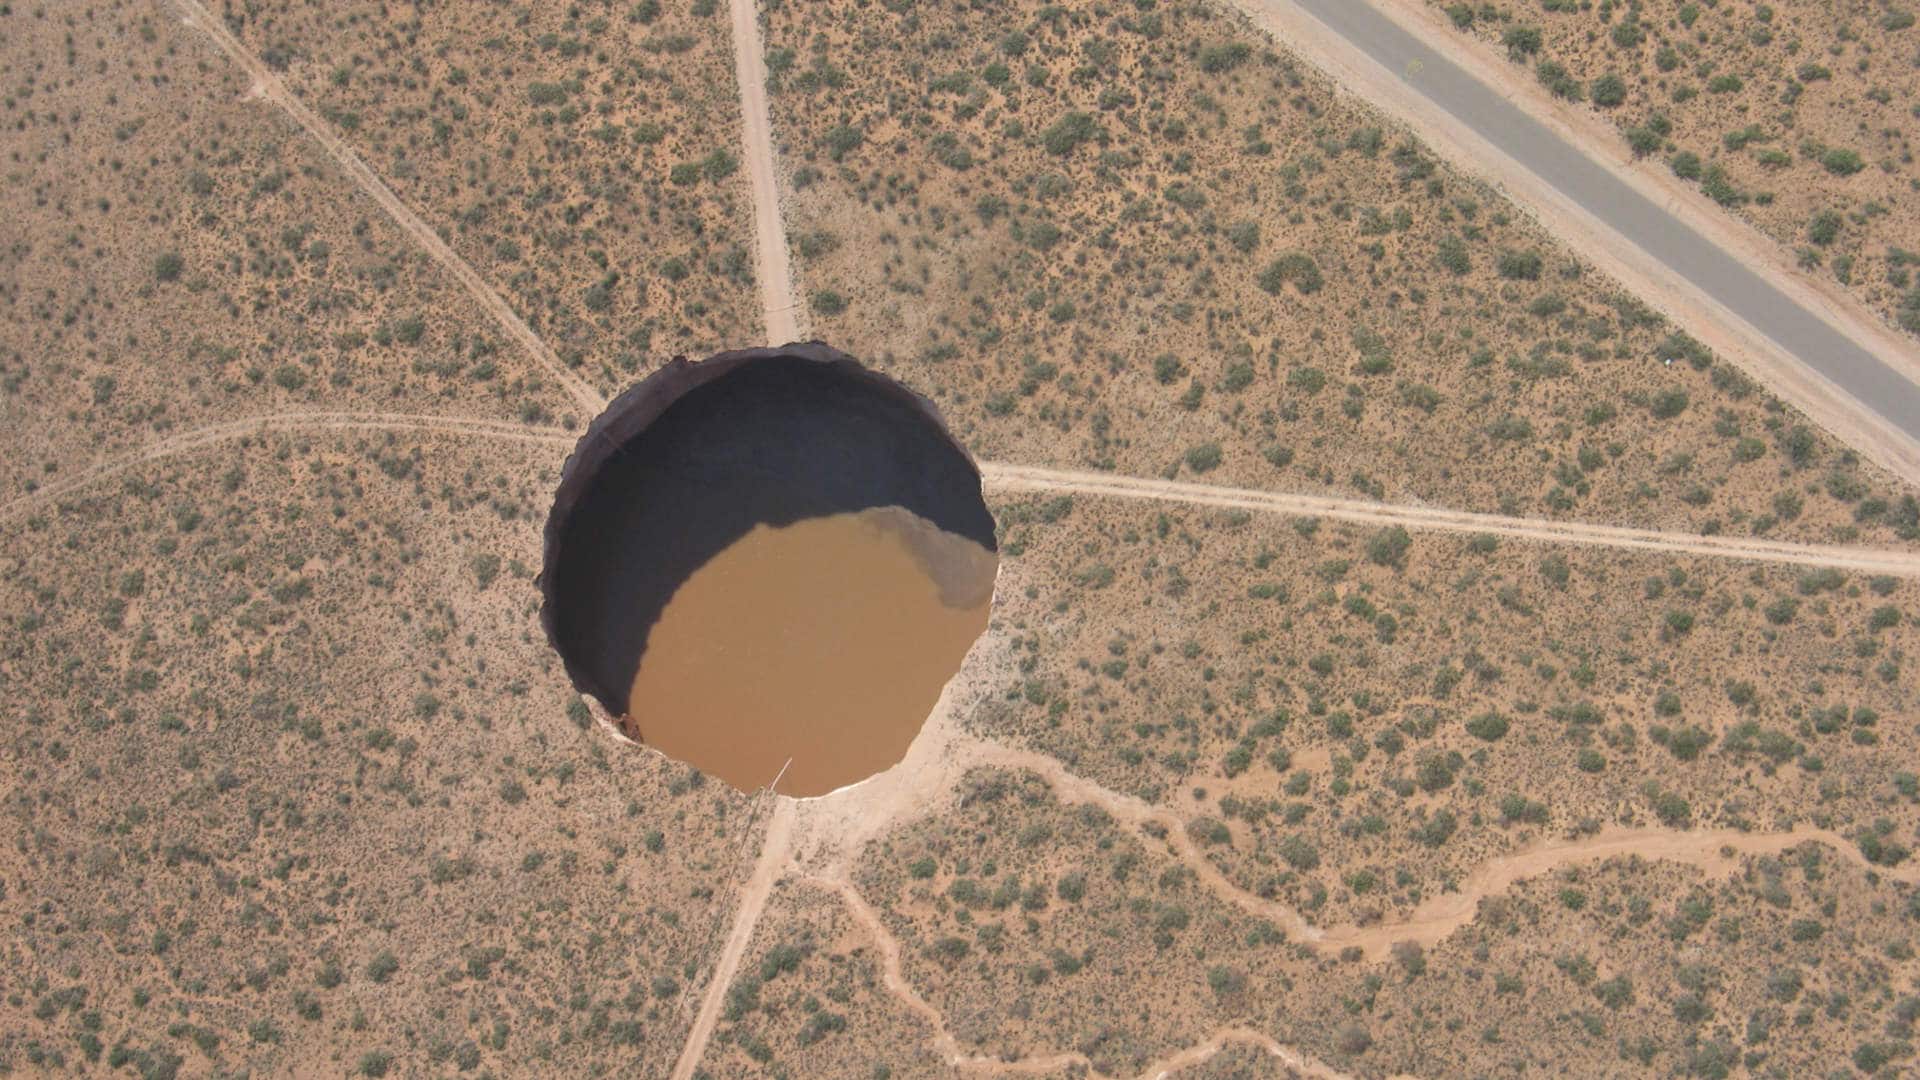 In 2008, two large sinkholes appeared at separate brine well sites in New Mexico.